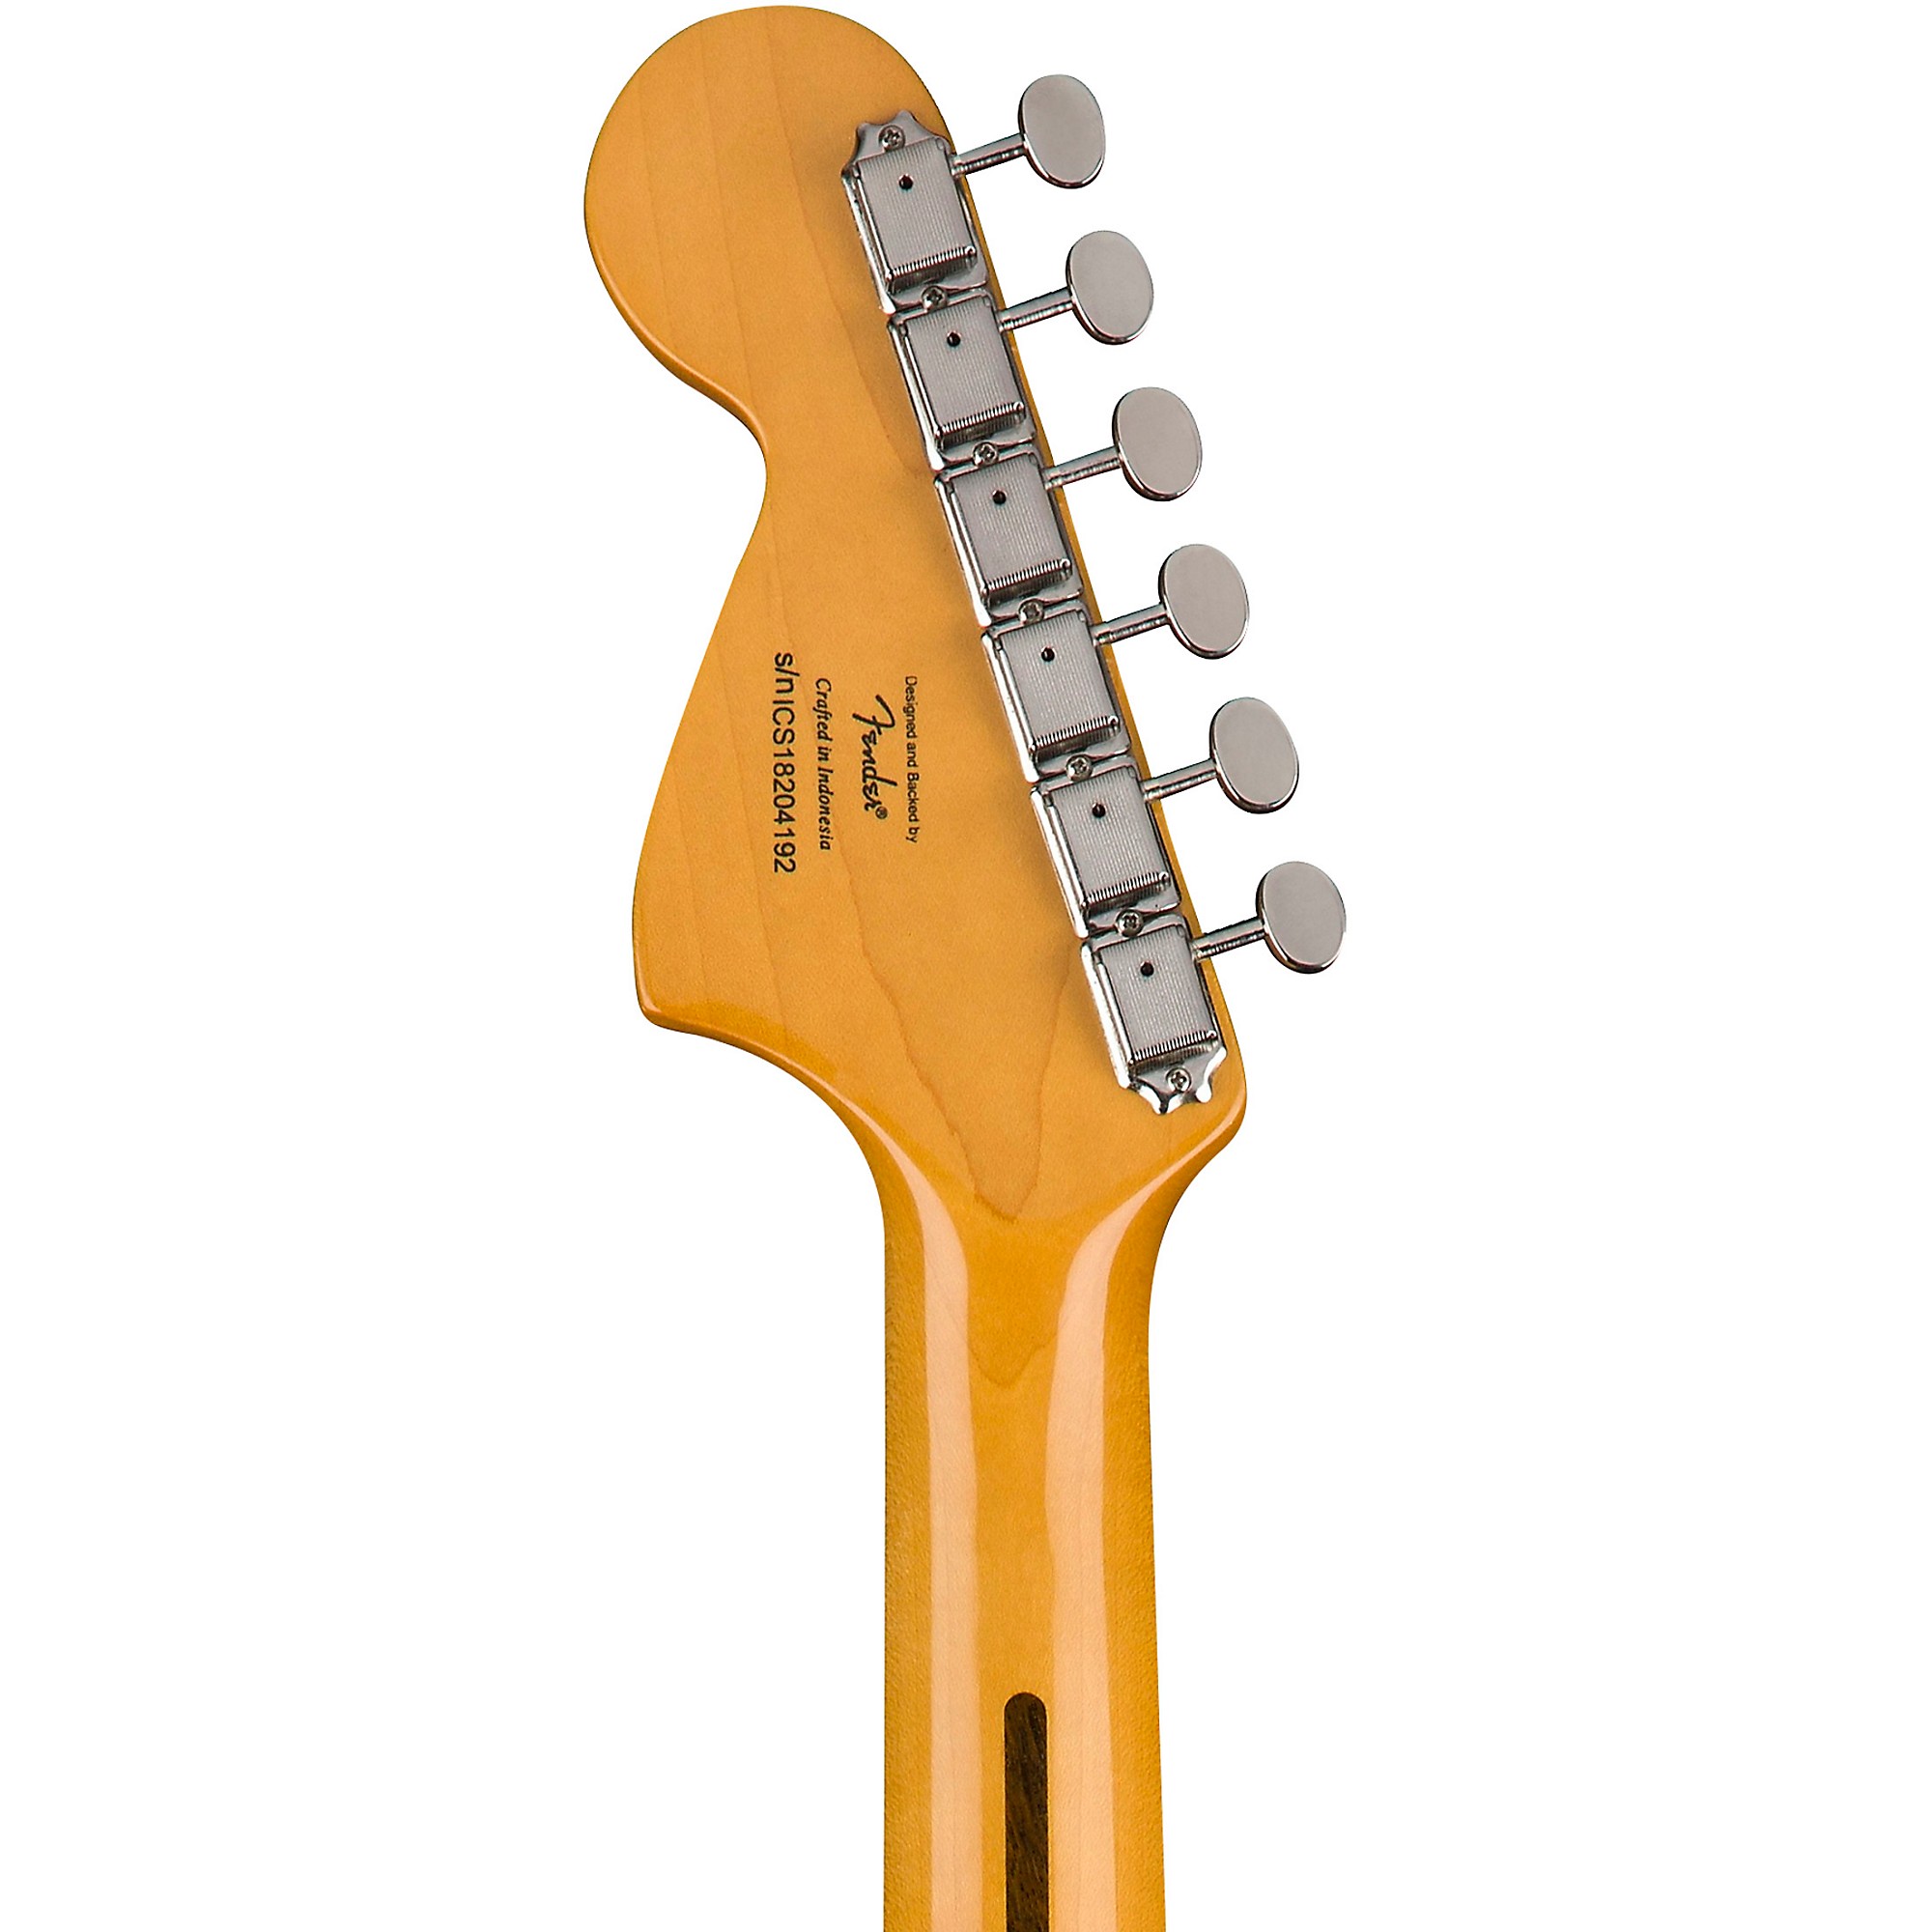 цена Электрогитара Squier Classic Vibe '70s Stratocaster Natural